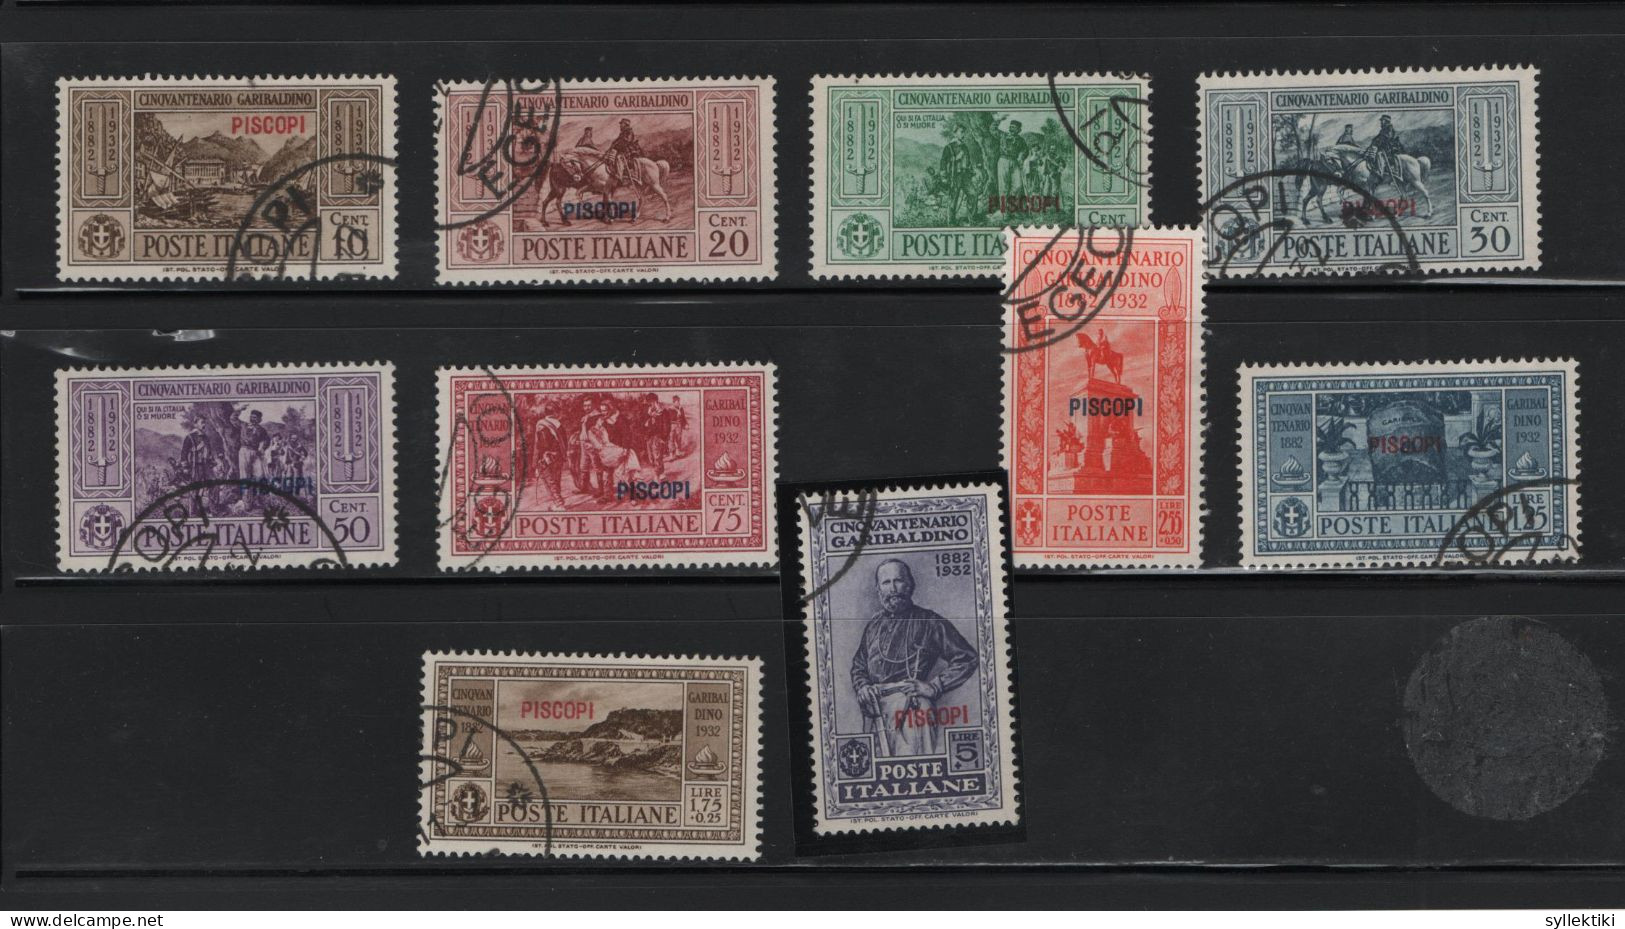 GREECE 1932 DODECANESE GARIBALDI ISSUE PISCOPI OVERPRINT COMPLETE SET USED STAMPS   HELLAS No 108II - 117II AND VALUE E - Dodekanisos